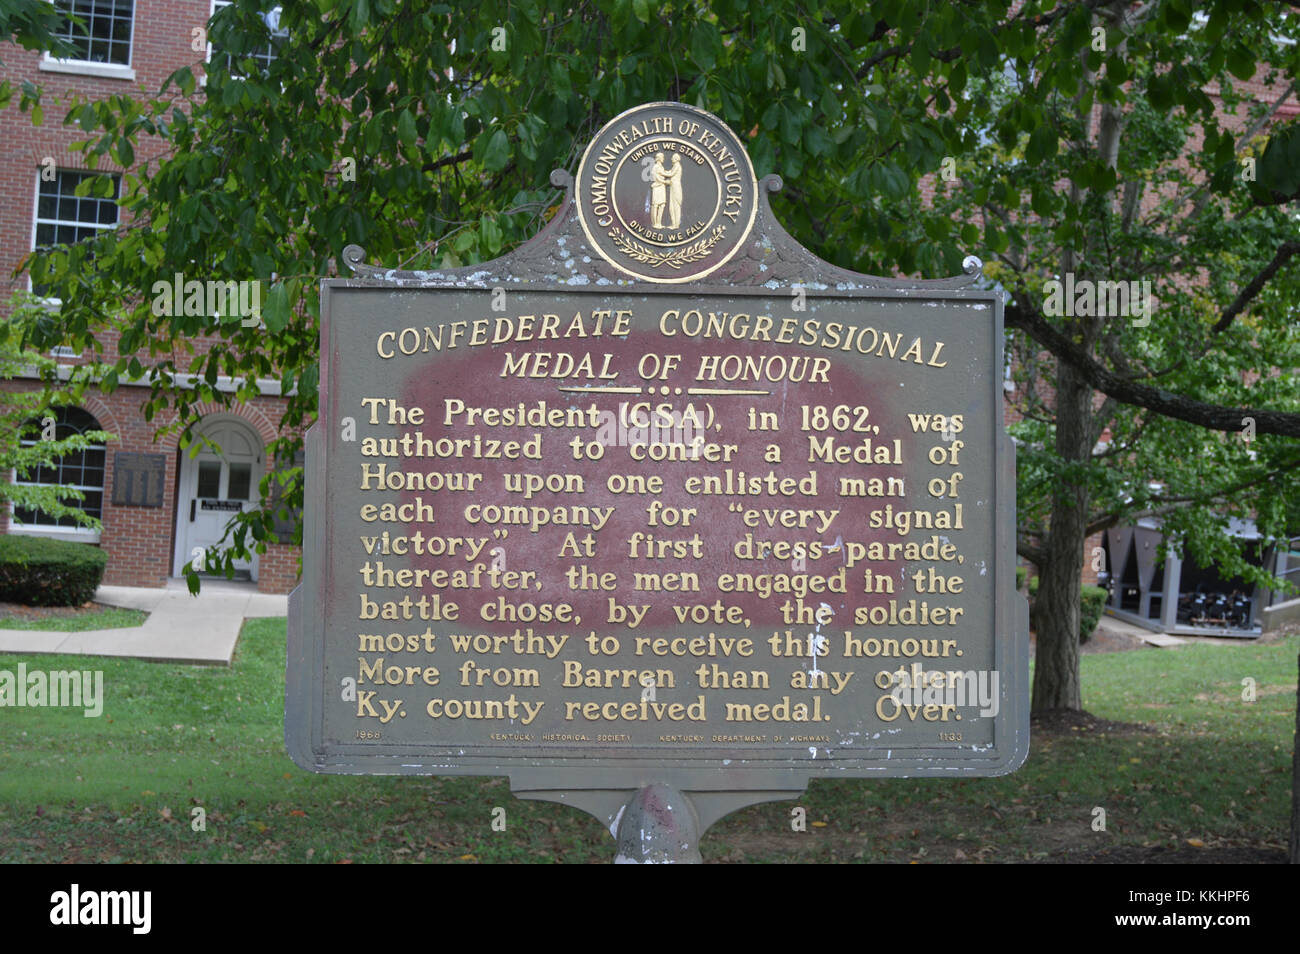 Confederate Congressional Medal of Honor historical marker Stock Photo